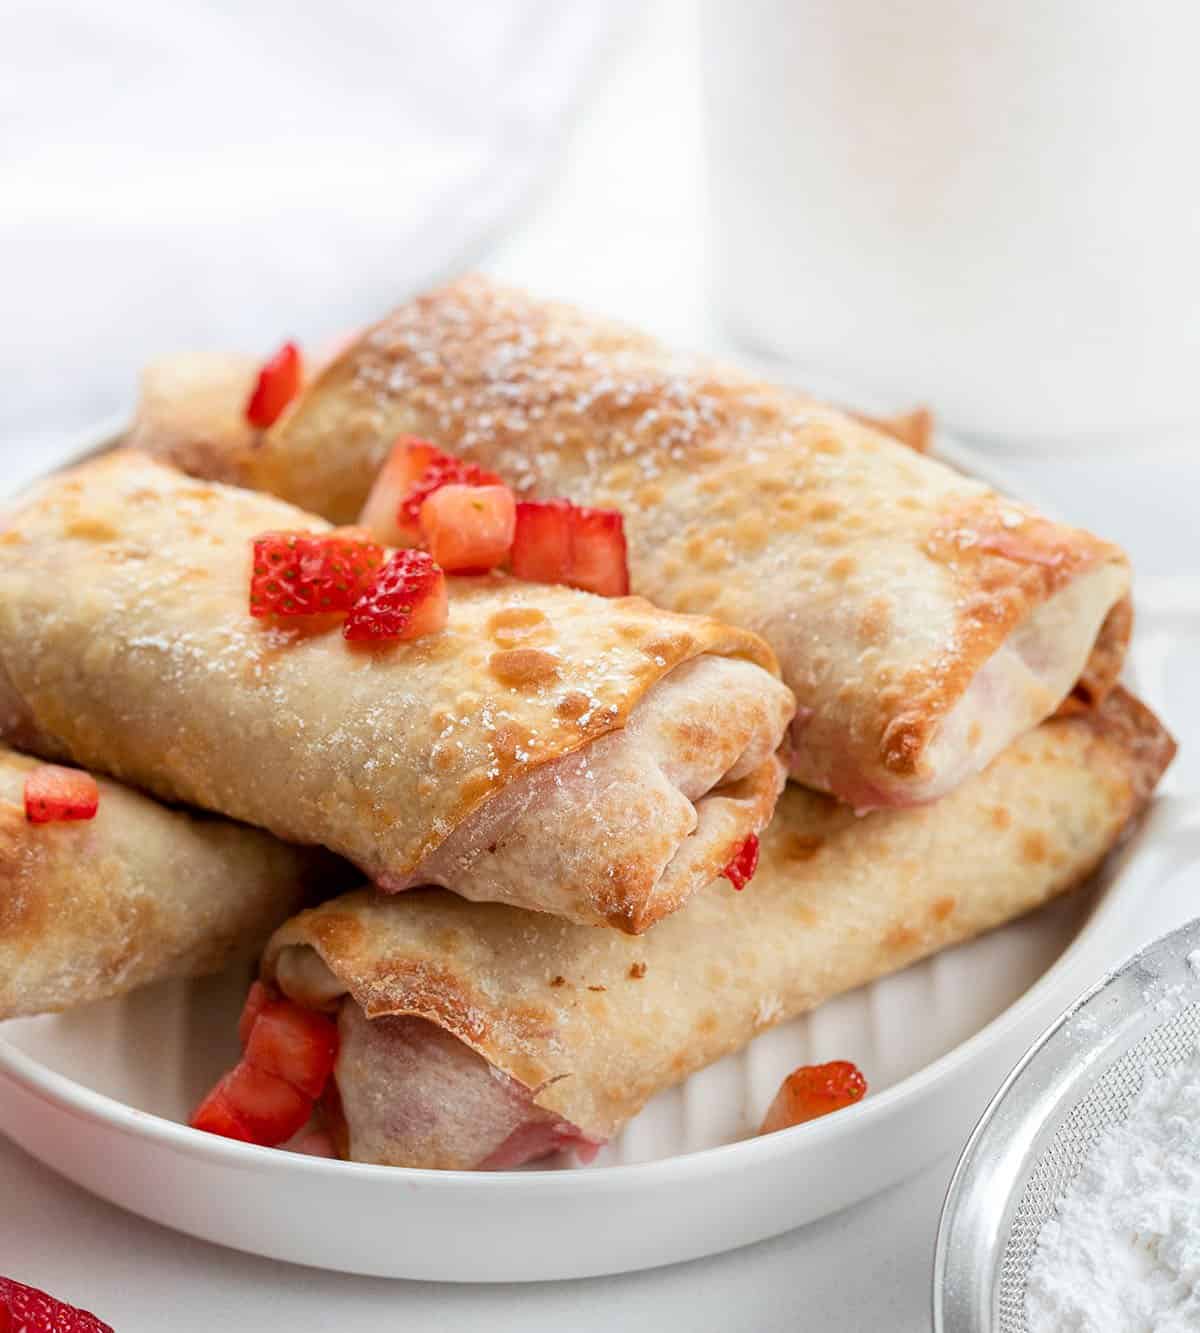 Strawberry Cheesecake Egg Rolls Stacked on a Plate with Strawberry Pieces on Top for Garnish